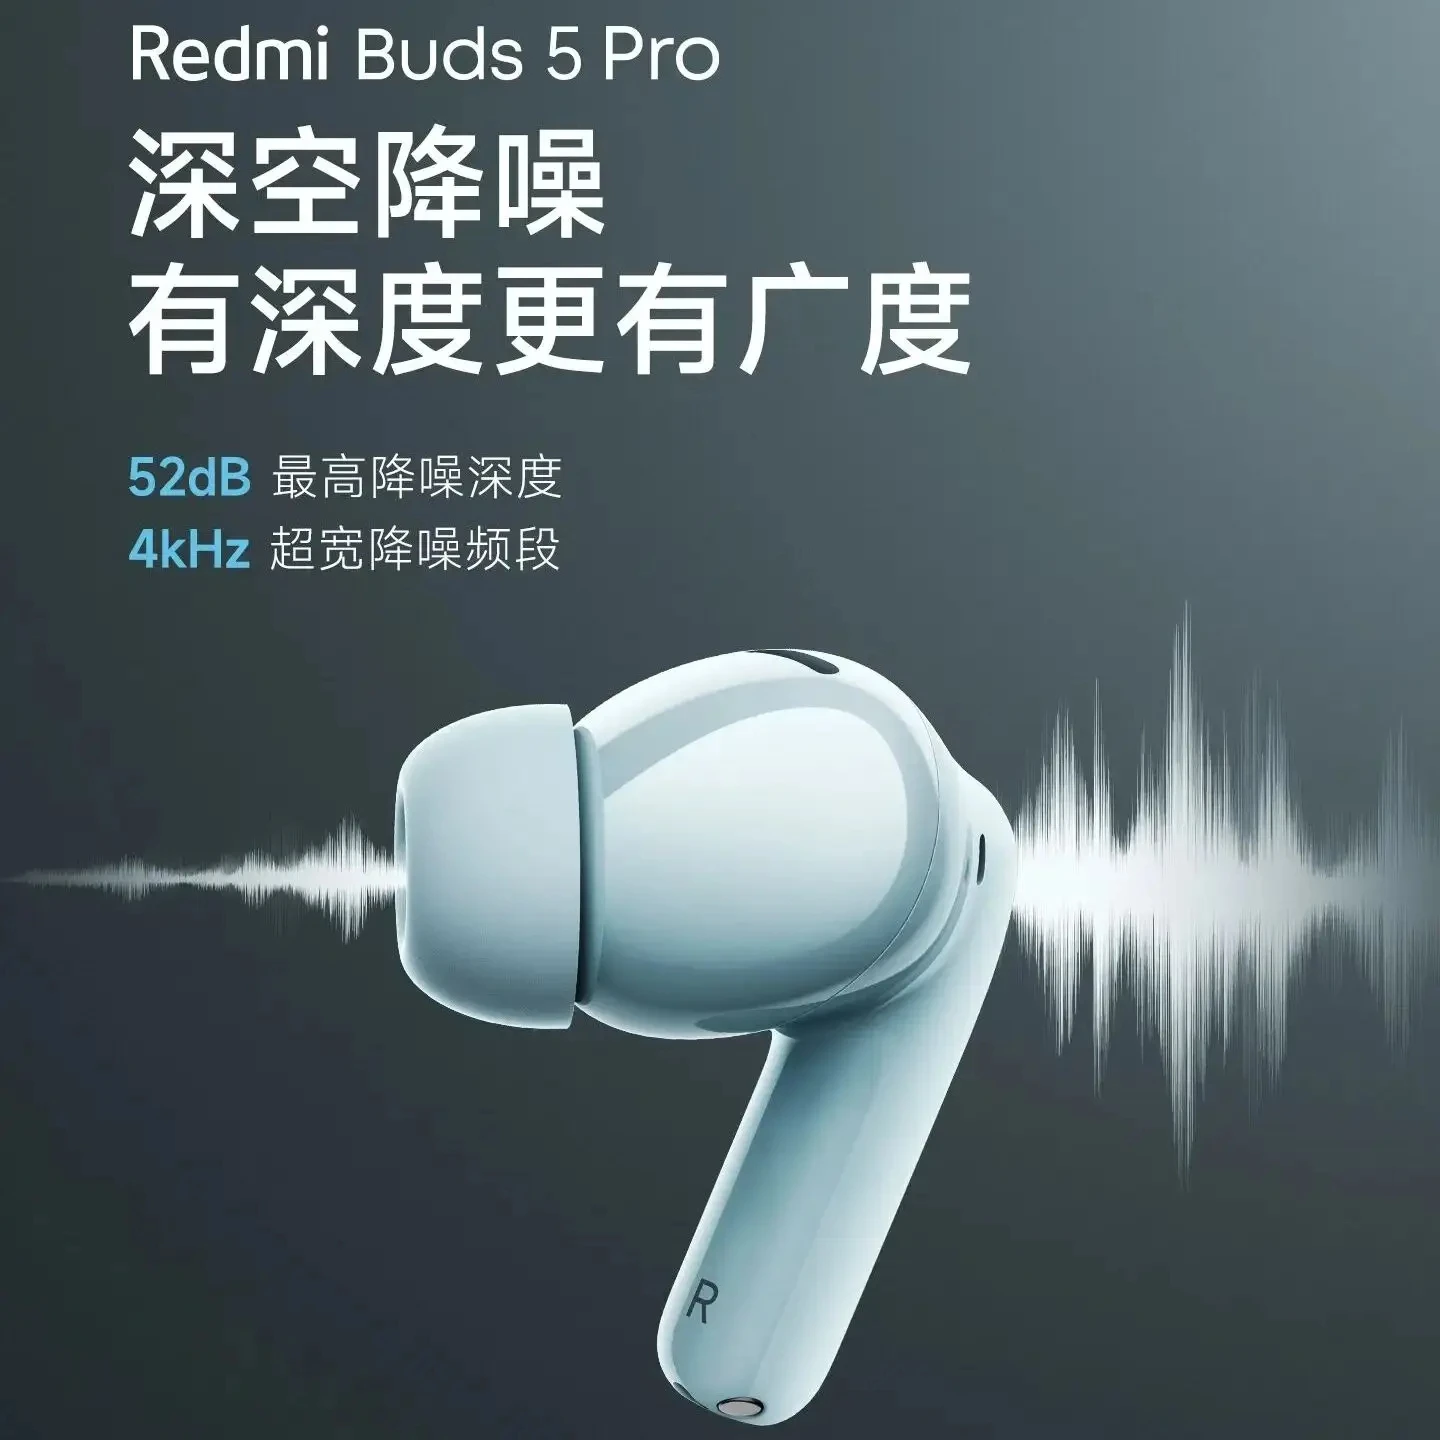 Redmi Buds 5 Pro Sales Begin on November 29 along with Redmi K70 series 